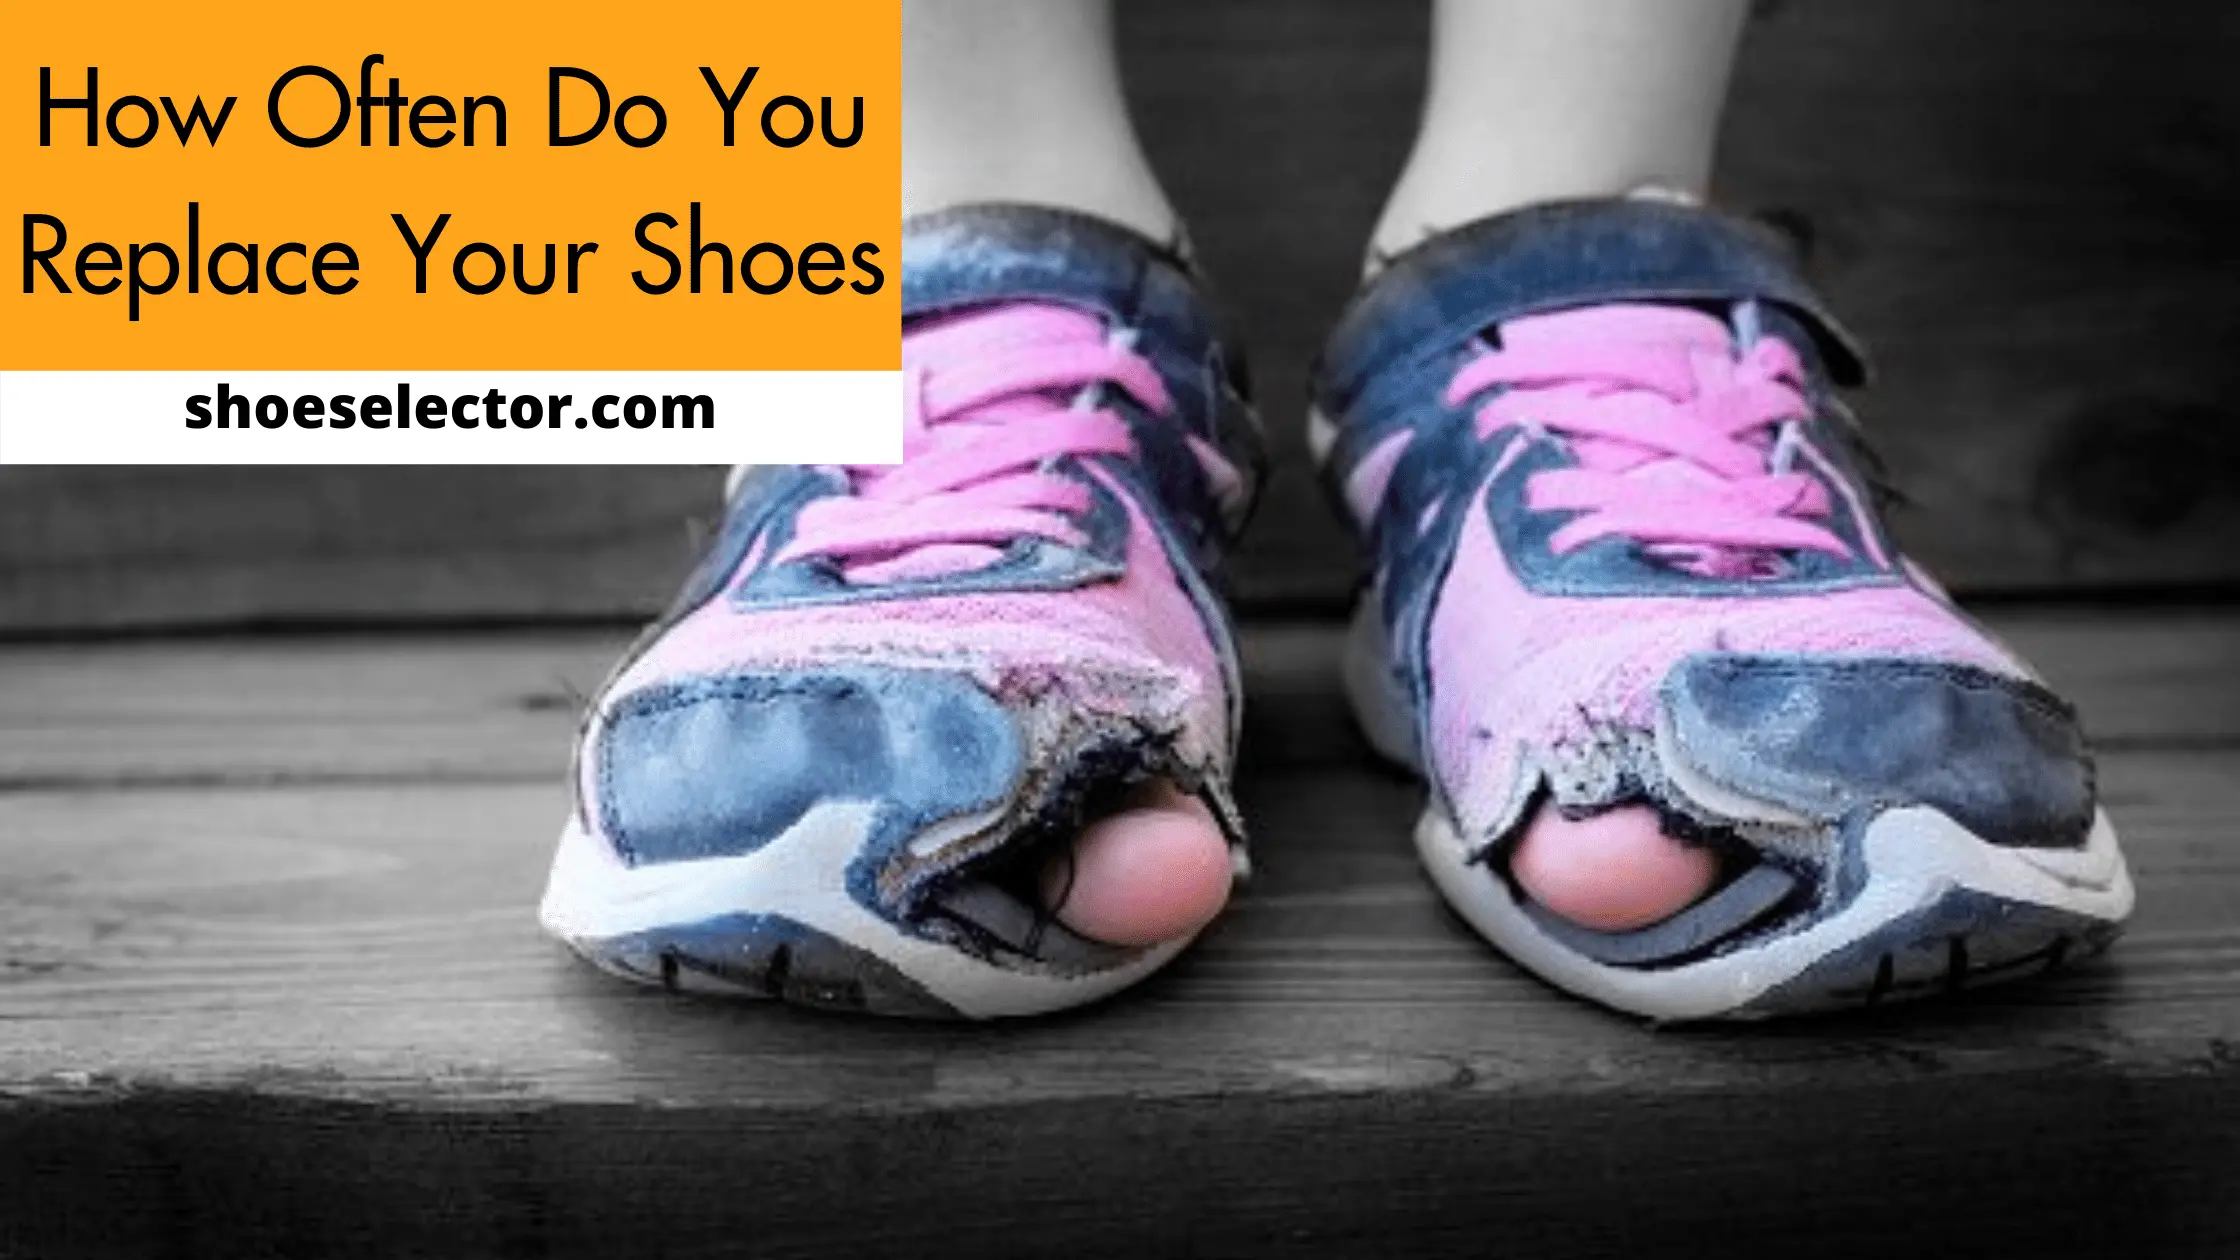 How Often Do You Replace Your Shoes?